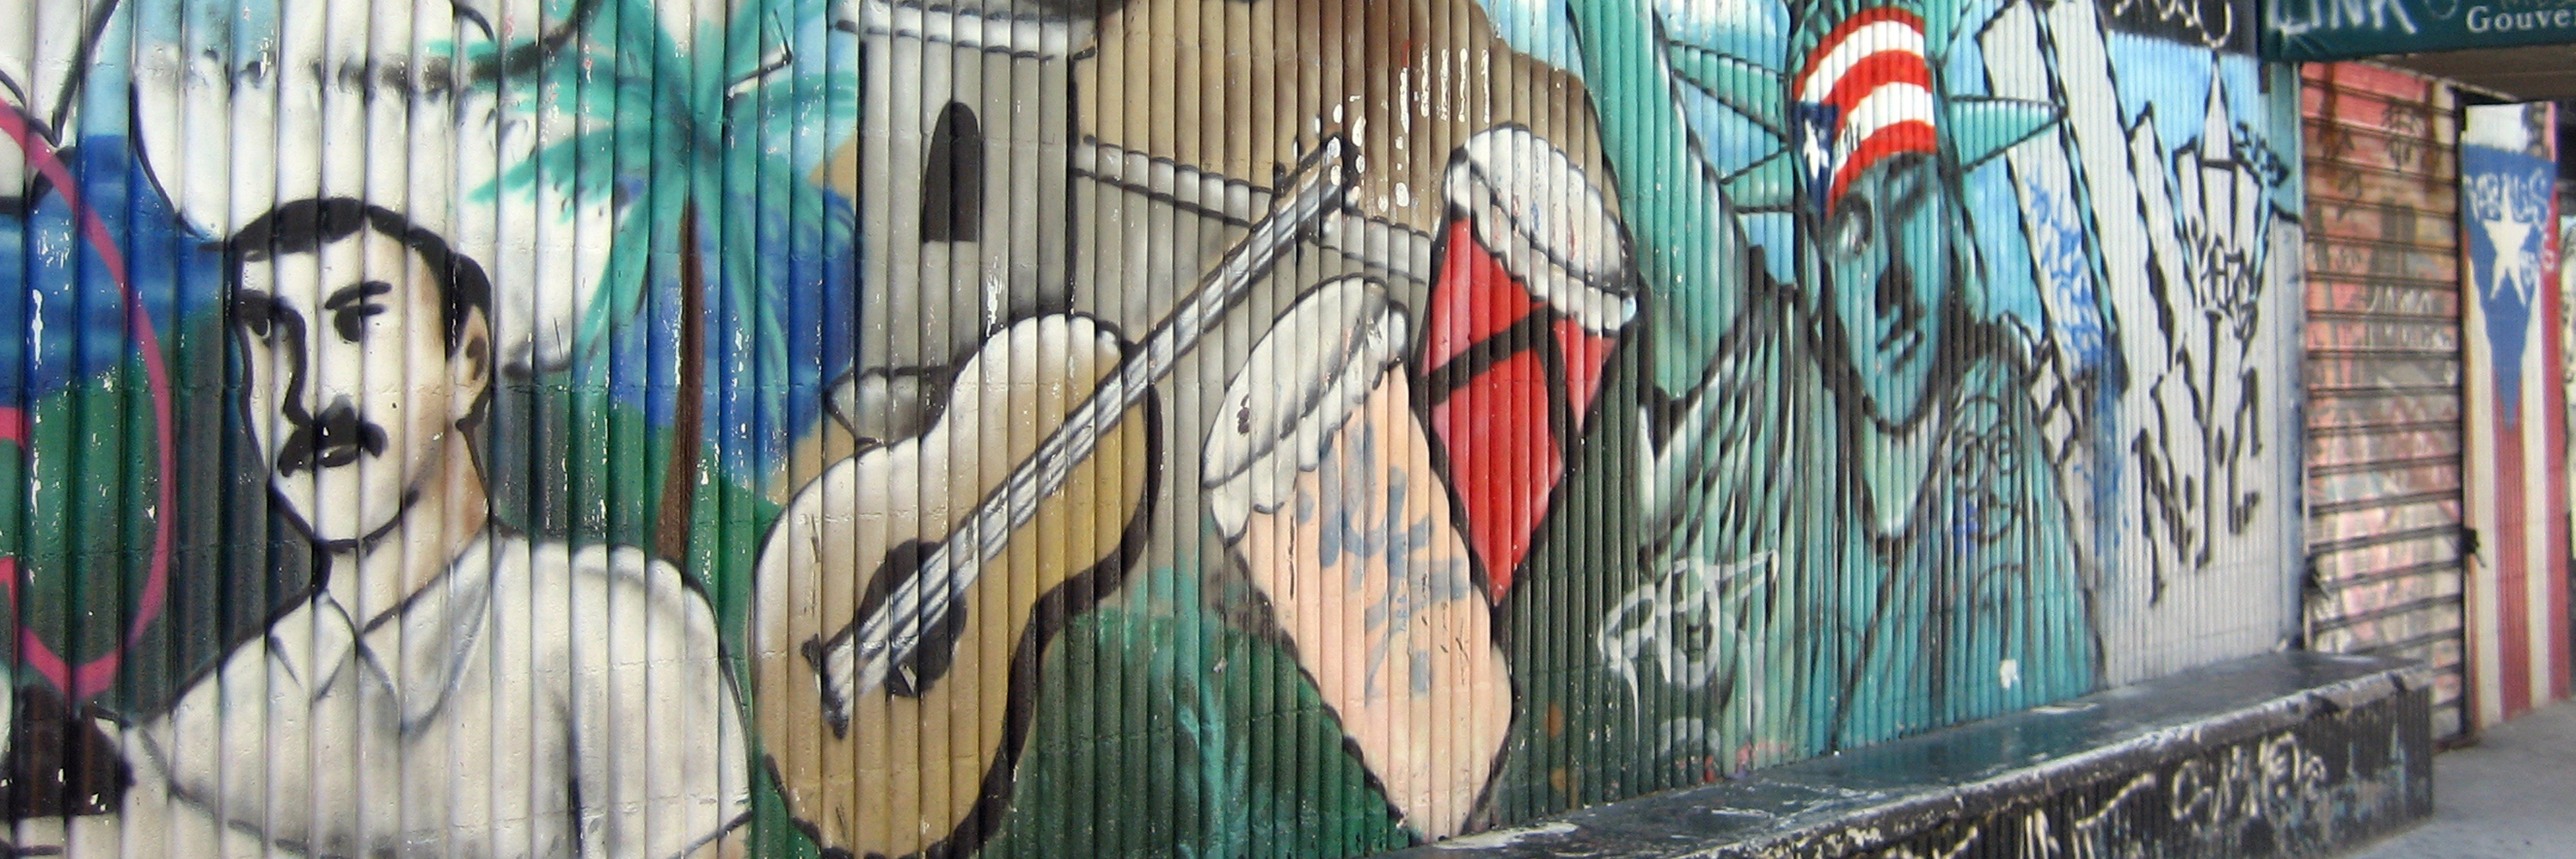 A graffiti mural on a fence in New York City with a flag of Puerto Rico.